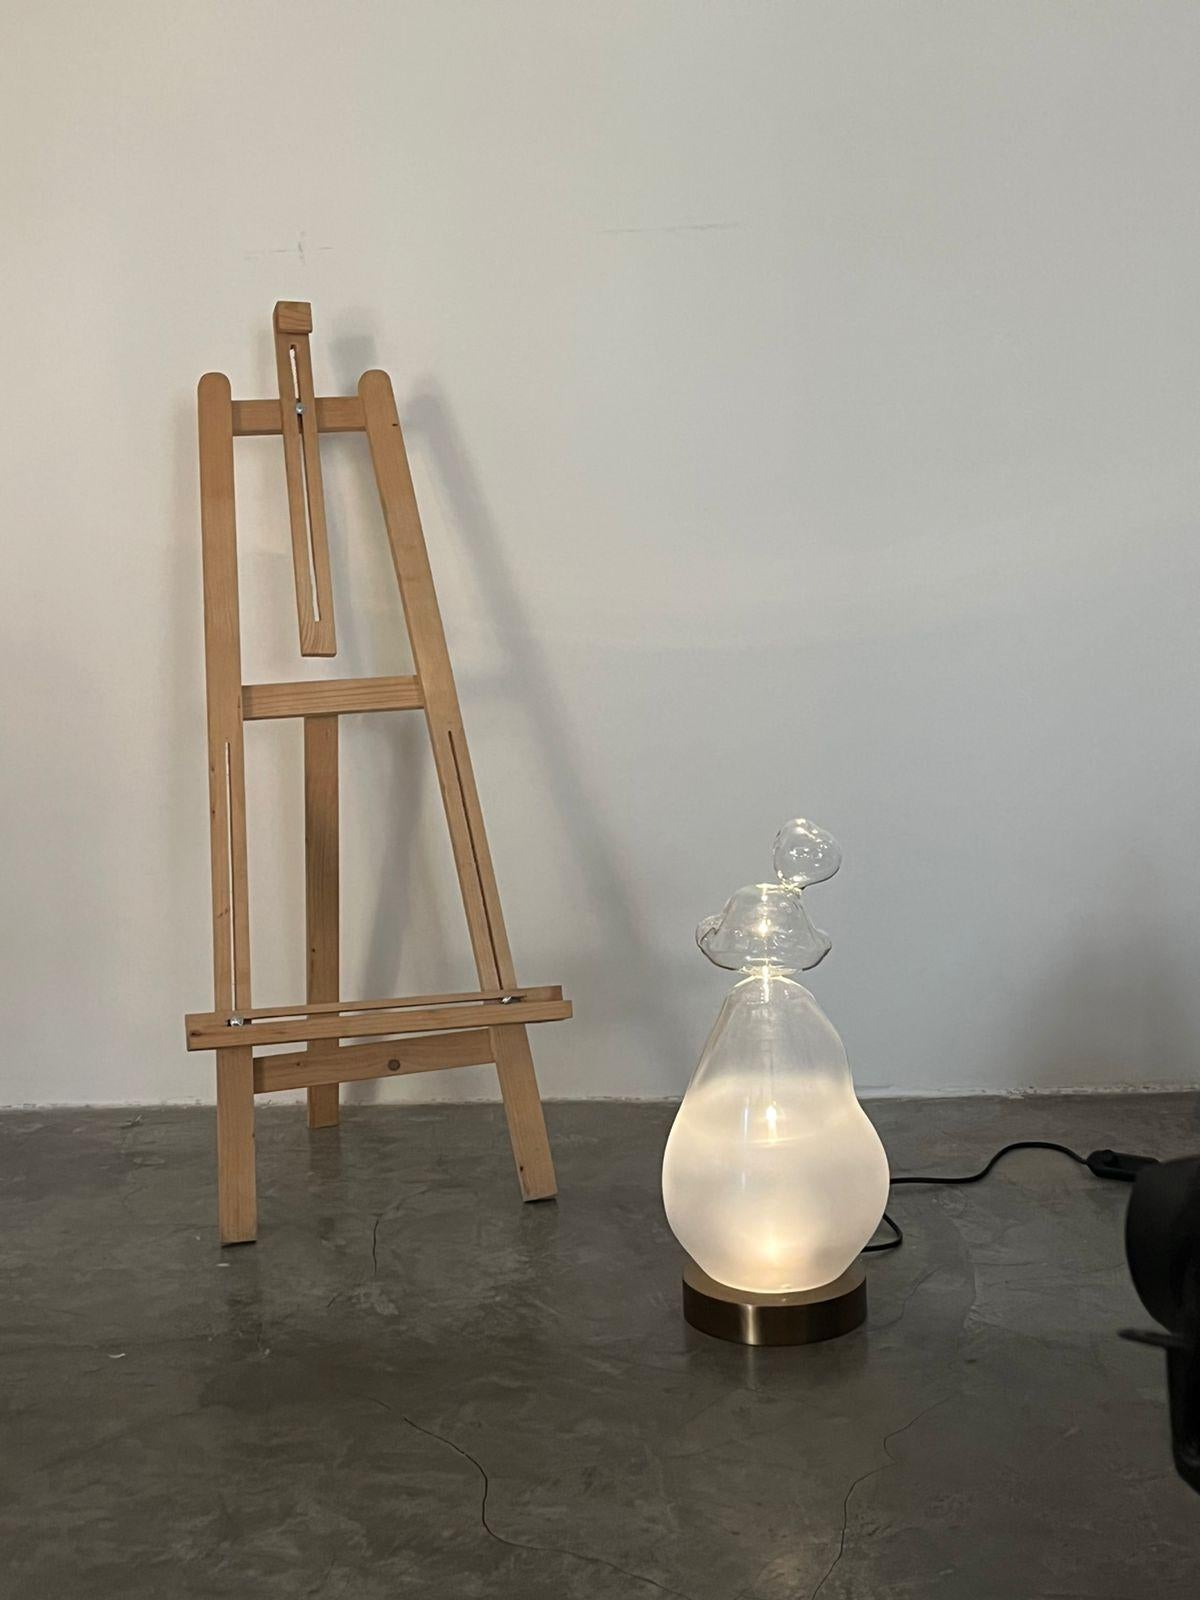 The work of designers Prateek Jain and Gautam Seth, co-founders of Klove Studio brings to life creative expressions via the medium of hand blown glass to create lighting installations Inspiration sources from the heart of nature as well as symbols